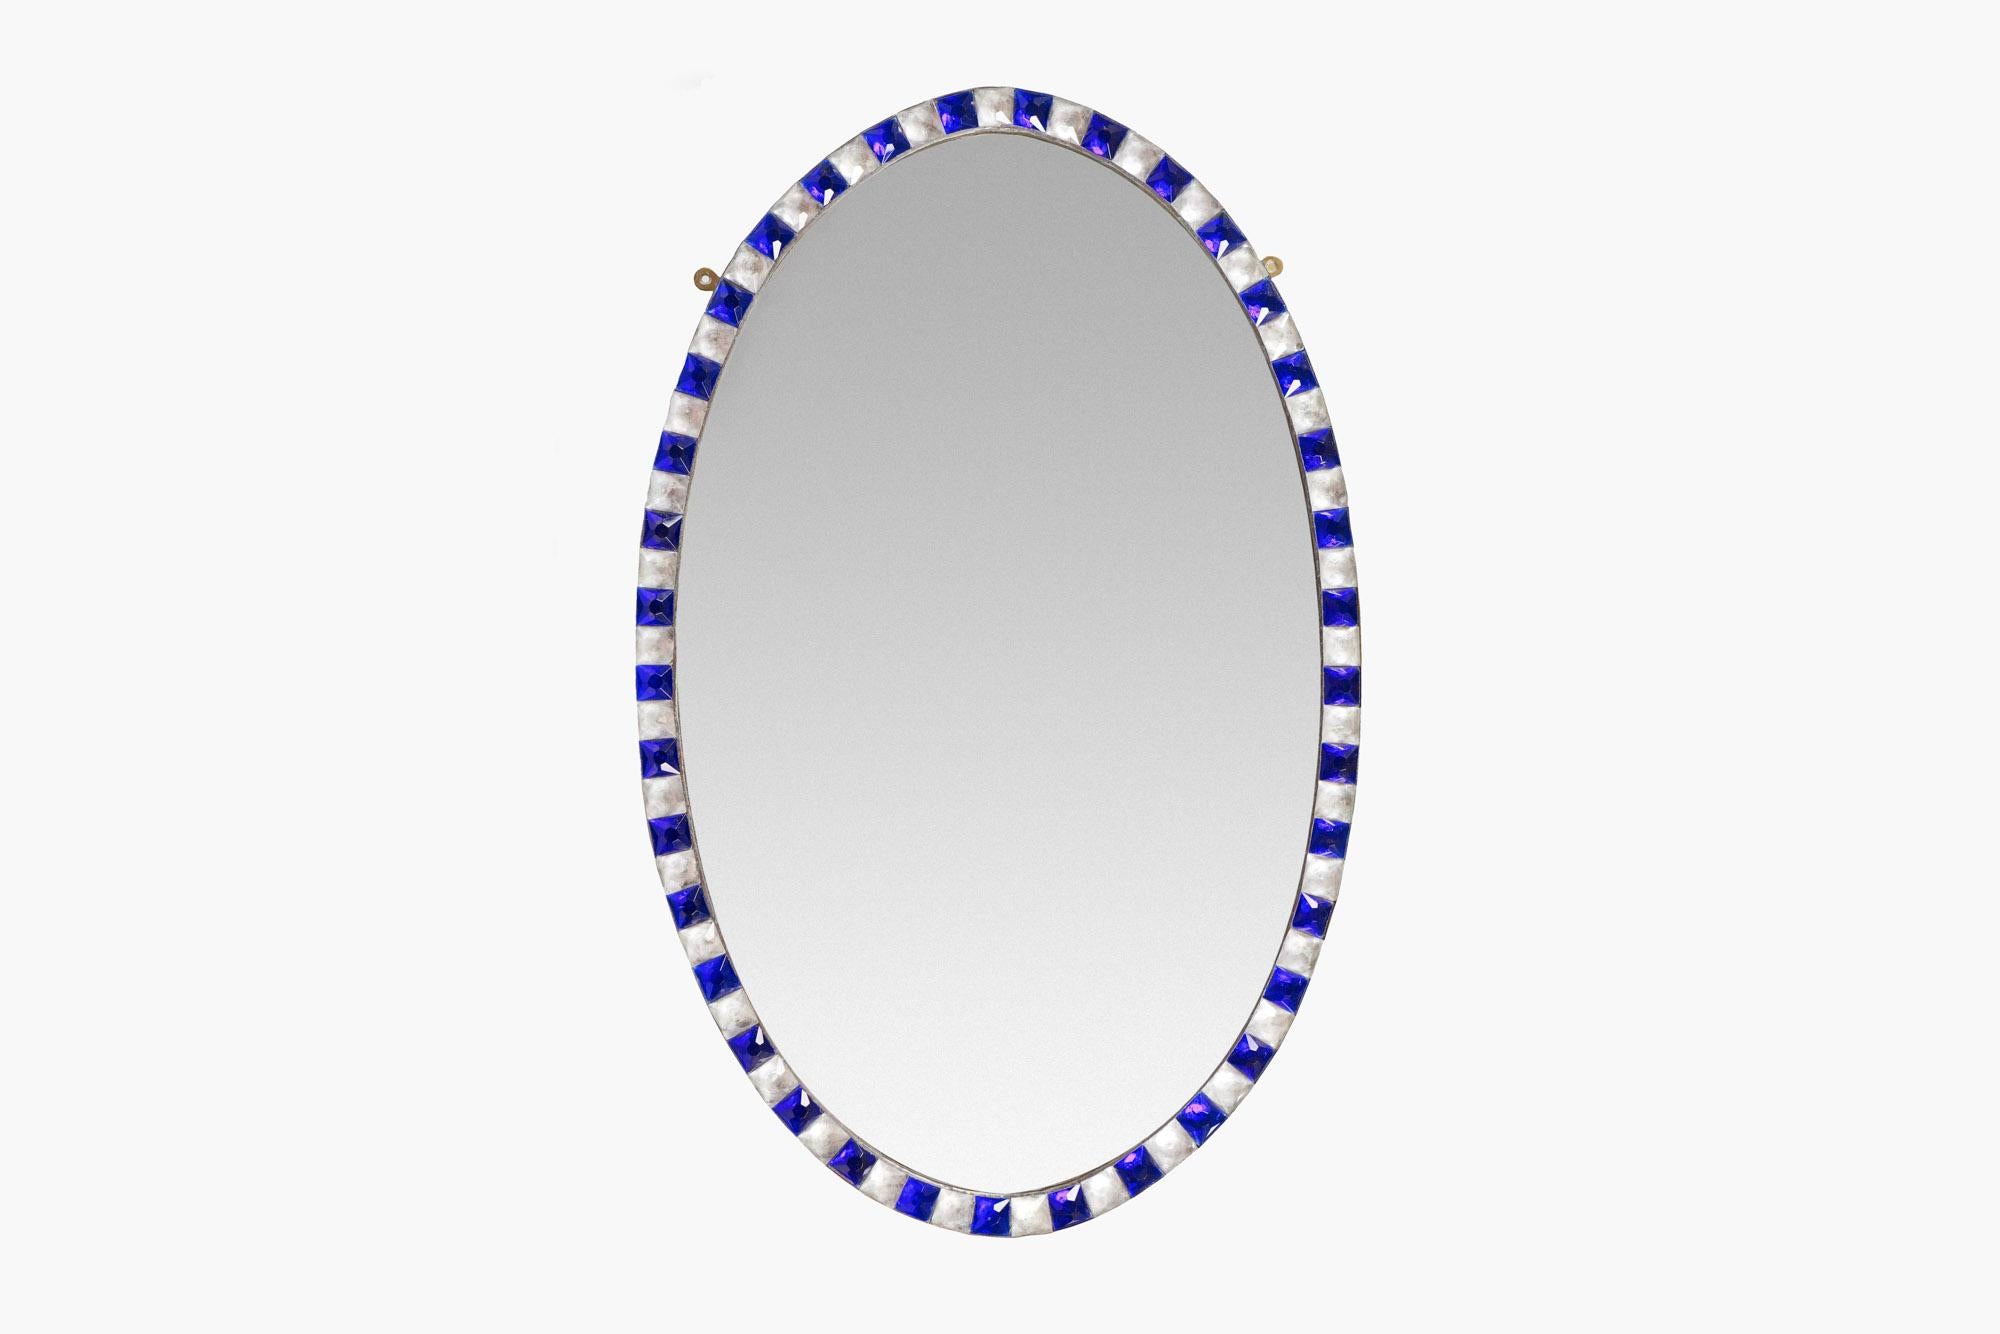 Early 19th century Irish Waterford mirror, the period plate of oval form set within frame of alternating faceted blue and clear glass studs.